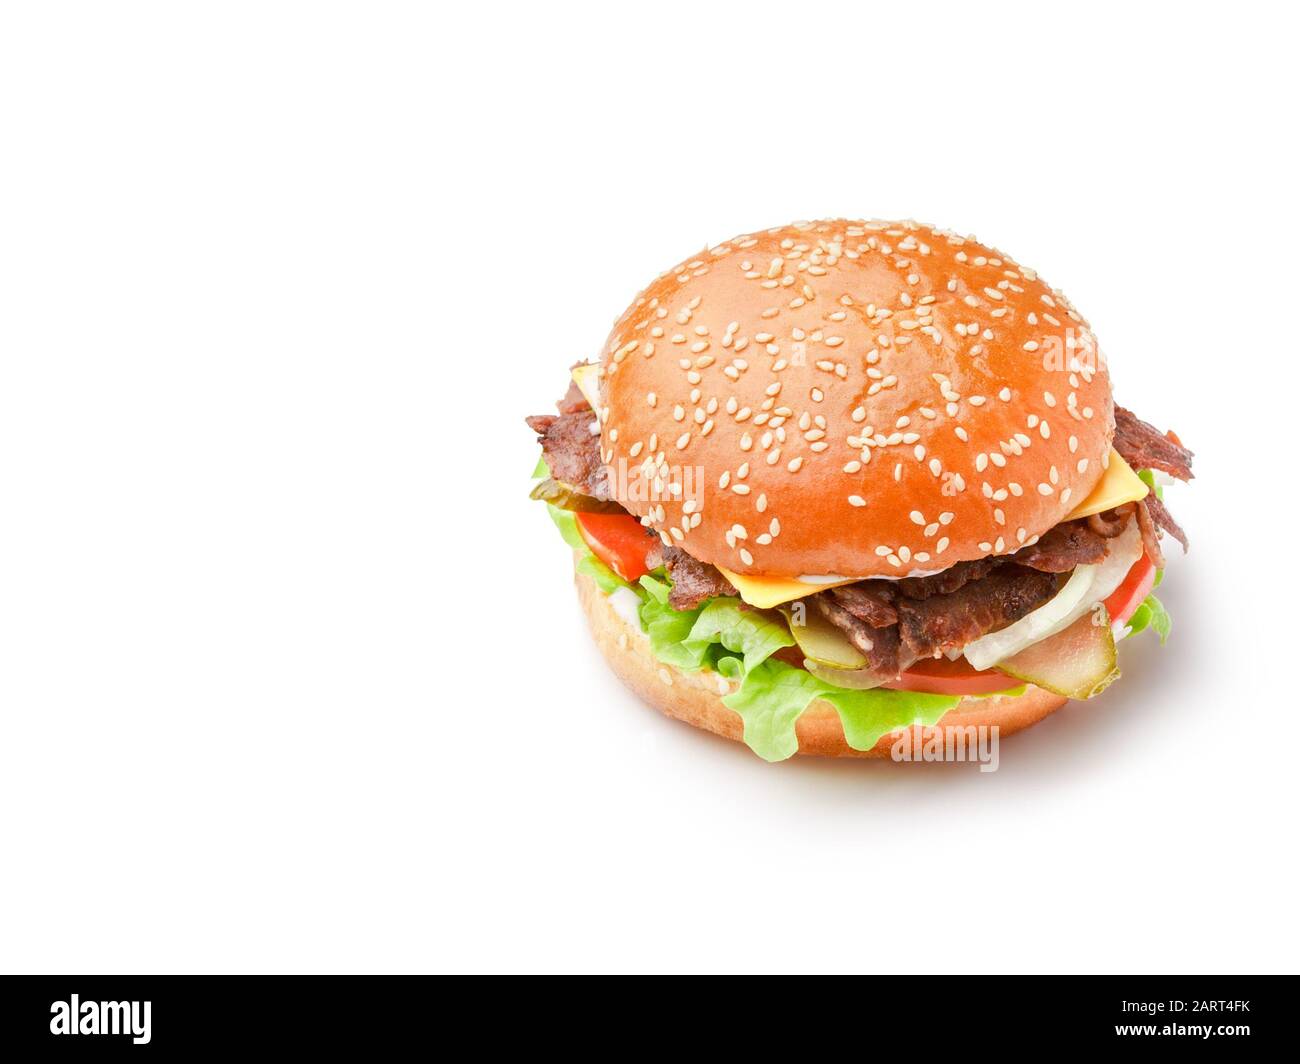 Cheeseburger or hamberger isolated on a white background. Fast food Stock Photo